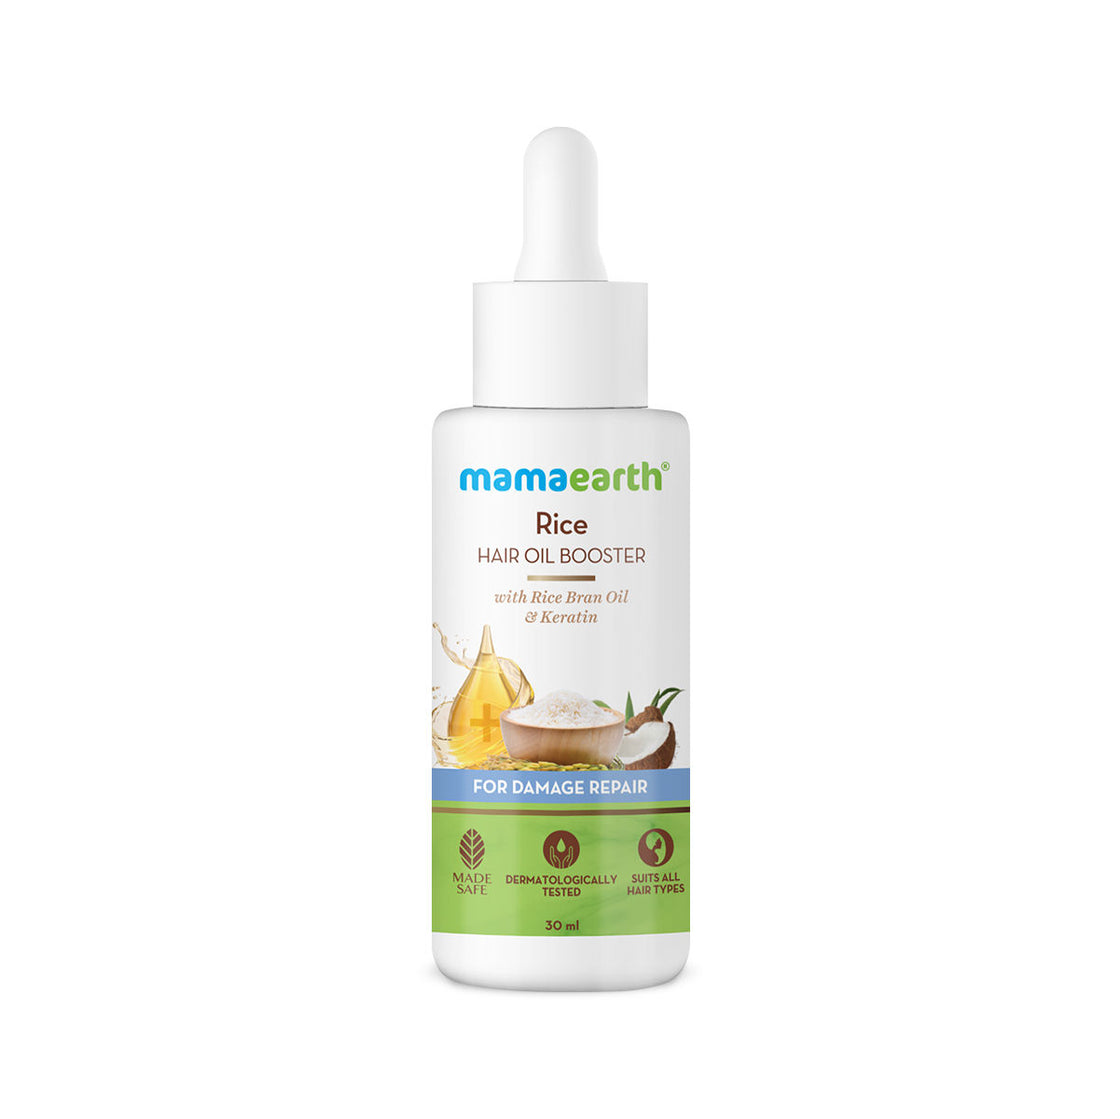 Mamaearth Rice Hair Oil Booster With Rice Bran Oil & Keratin For Damage Repair